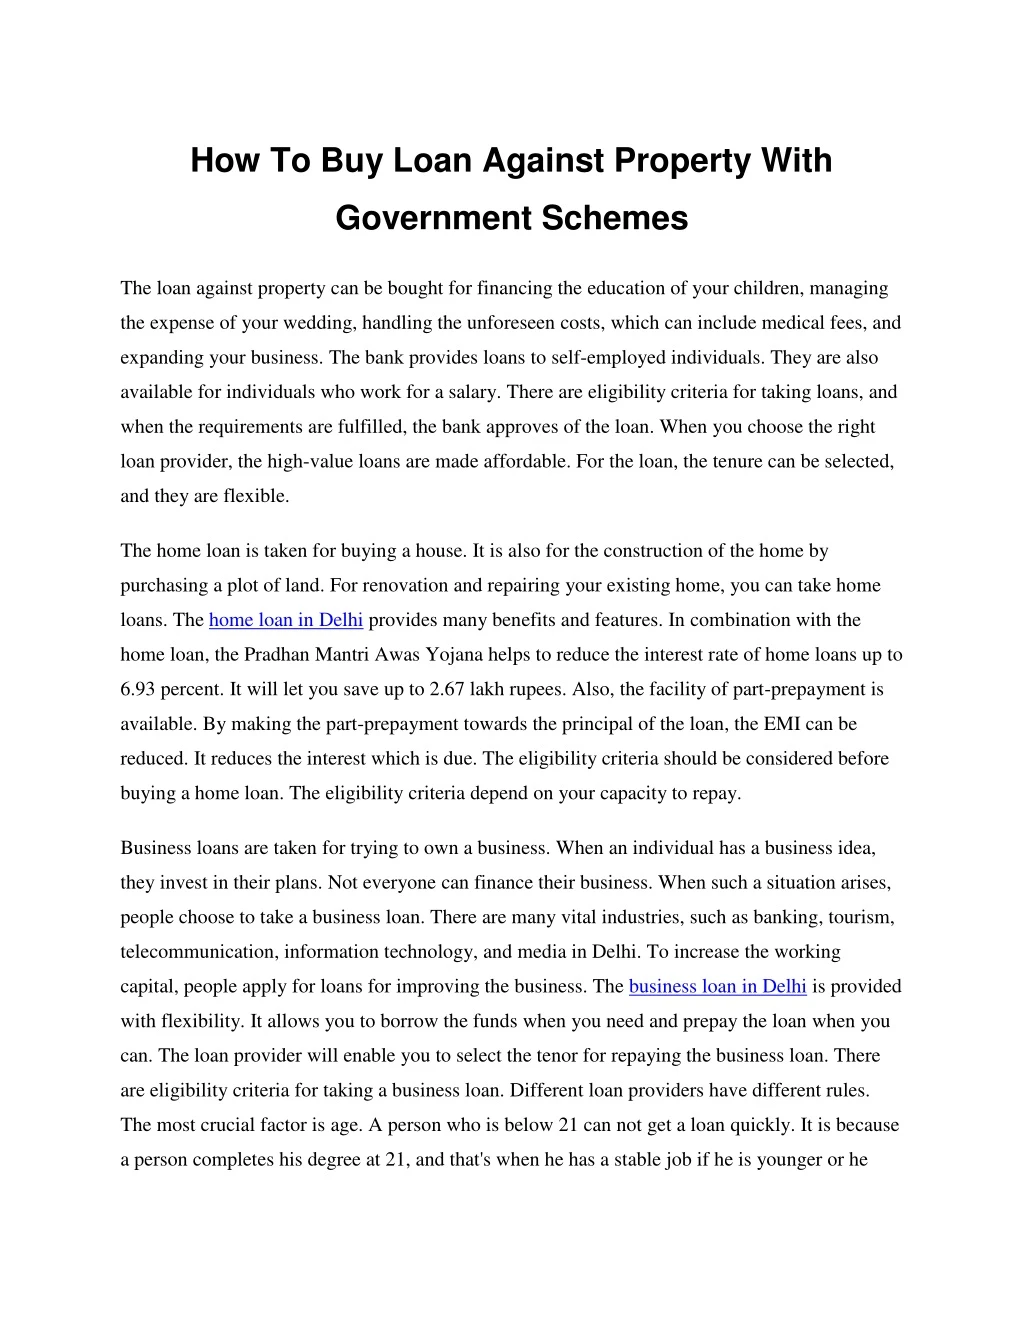 how to buy loan against property with